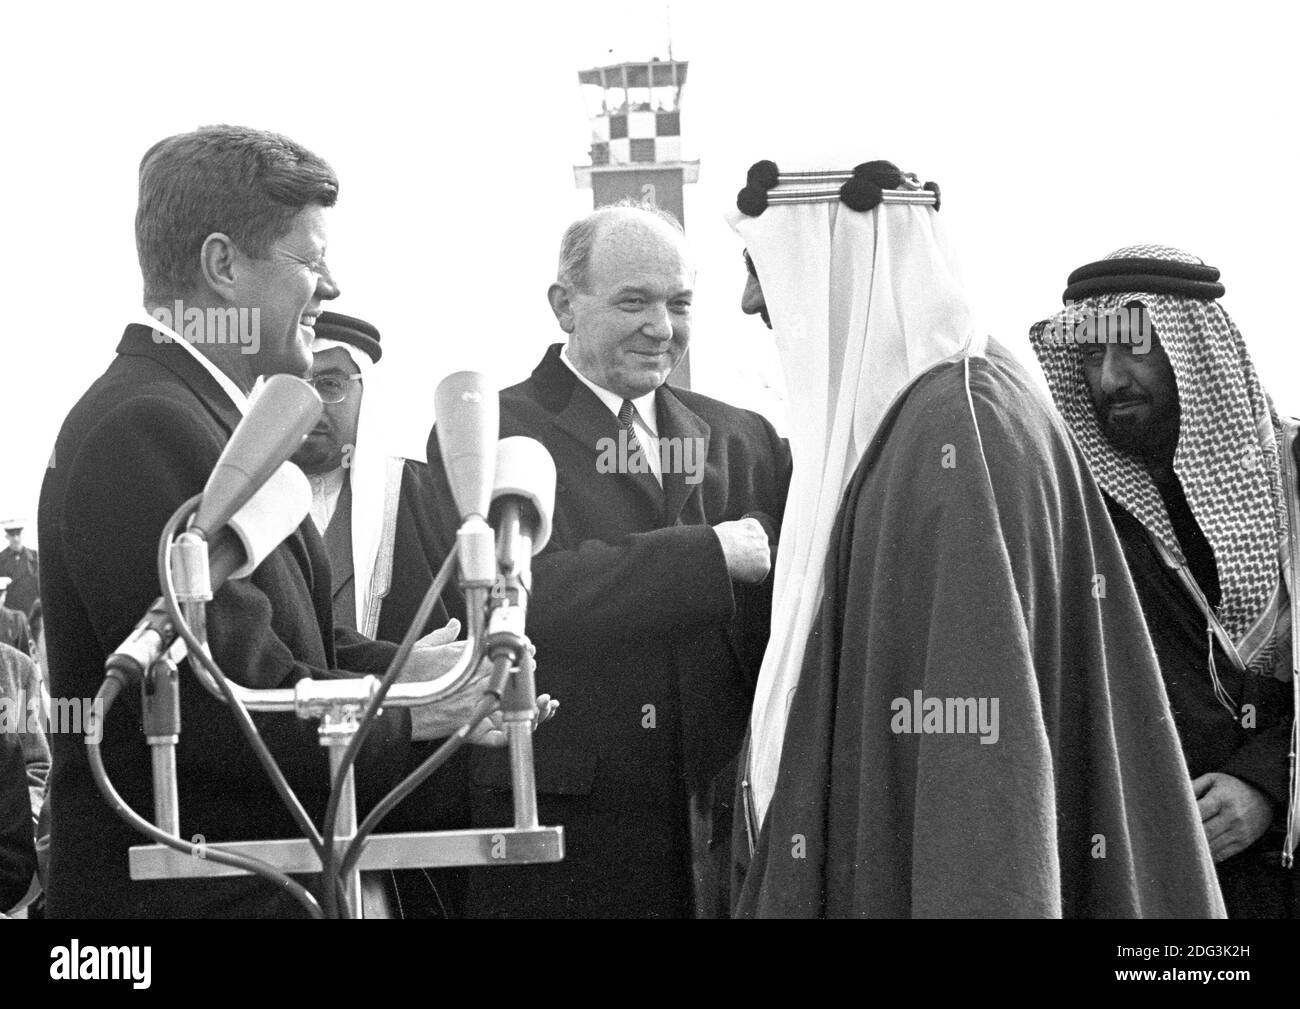 United States President John F. Kennedy, left, and US Secretary of State Dean Rusk, center left, welcome King Saud bin Abdulaziz Al Saud of Saudi Arabia, center right, to the United States following a ceremony at Andrews Air Force Base, Maryland on February 13, 1962. Photo by Arnie Sachs / CNP /ABACAPRESS.COM Stock Photo